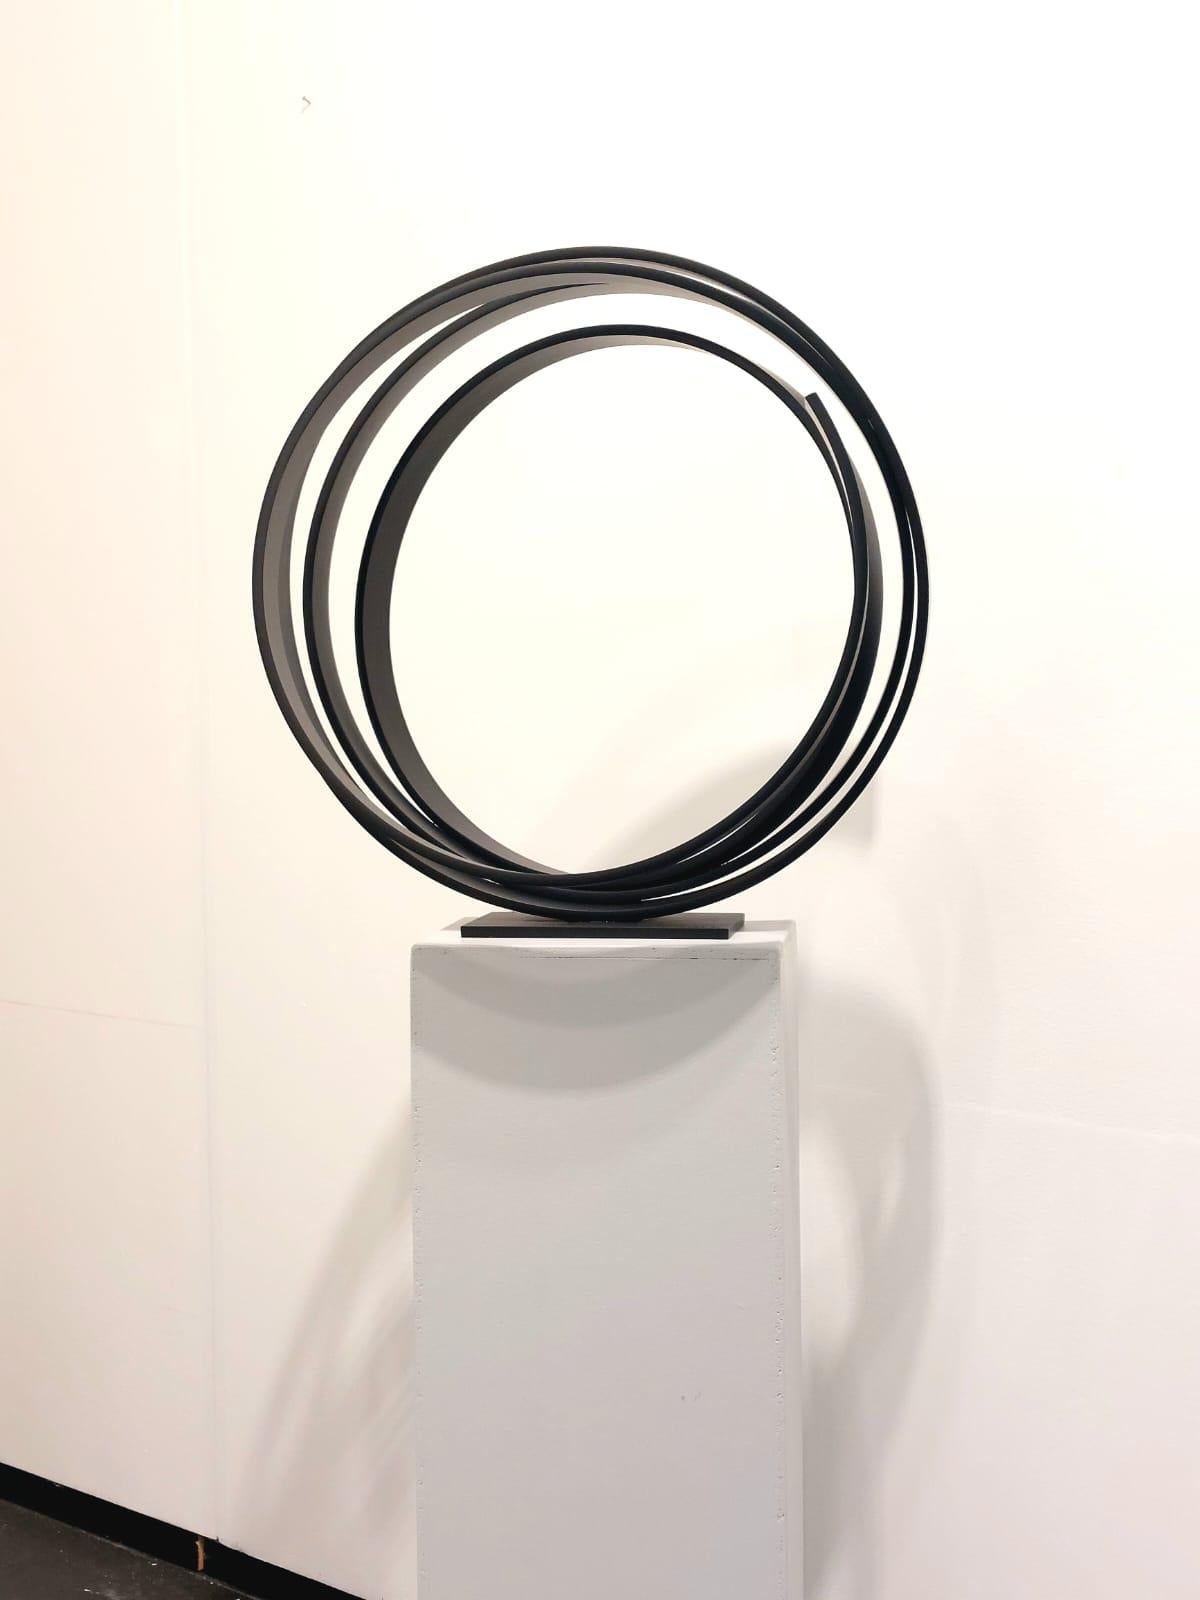 Large Black Orbit by Kuno Vollet - Large Contemporary Round Orbit sculpture  For Sale 5